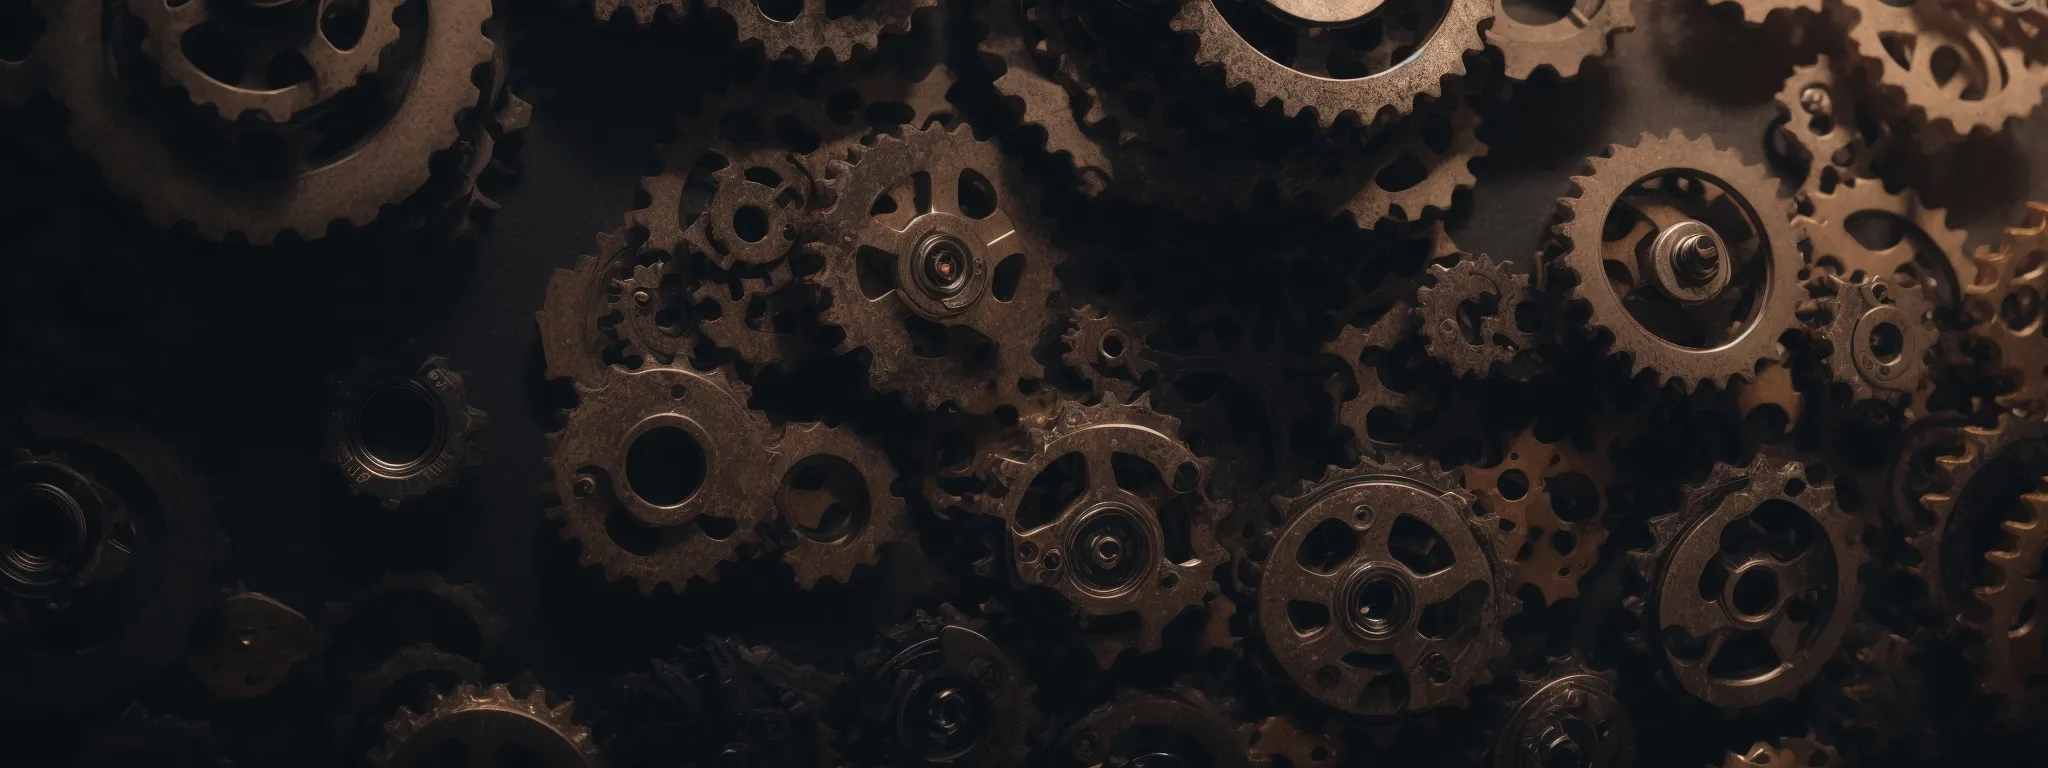 a simplified illustration of gears interlocking, symbolizing the integration of wordpress, seopress, and indexnow for enhanced seo.